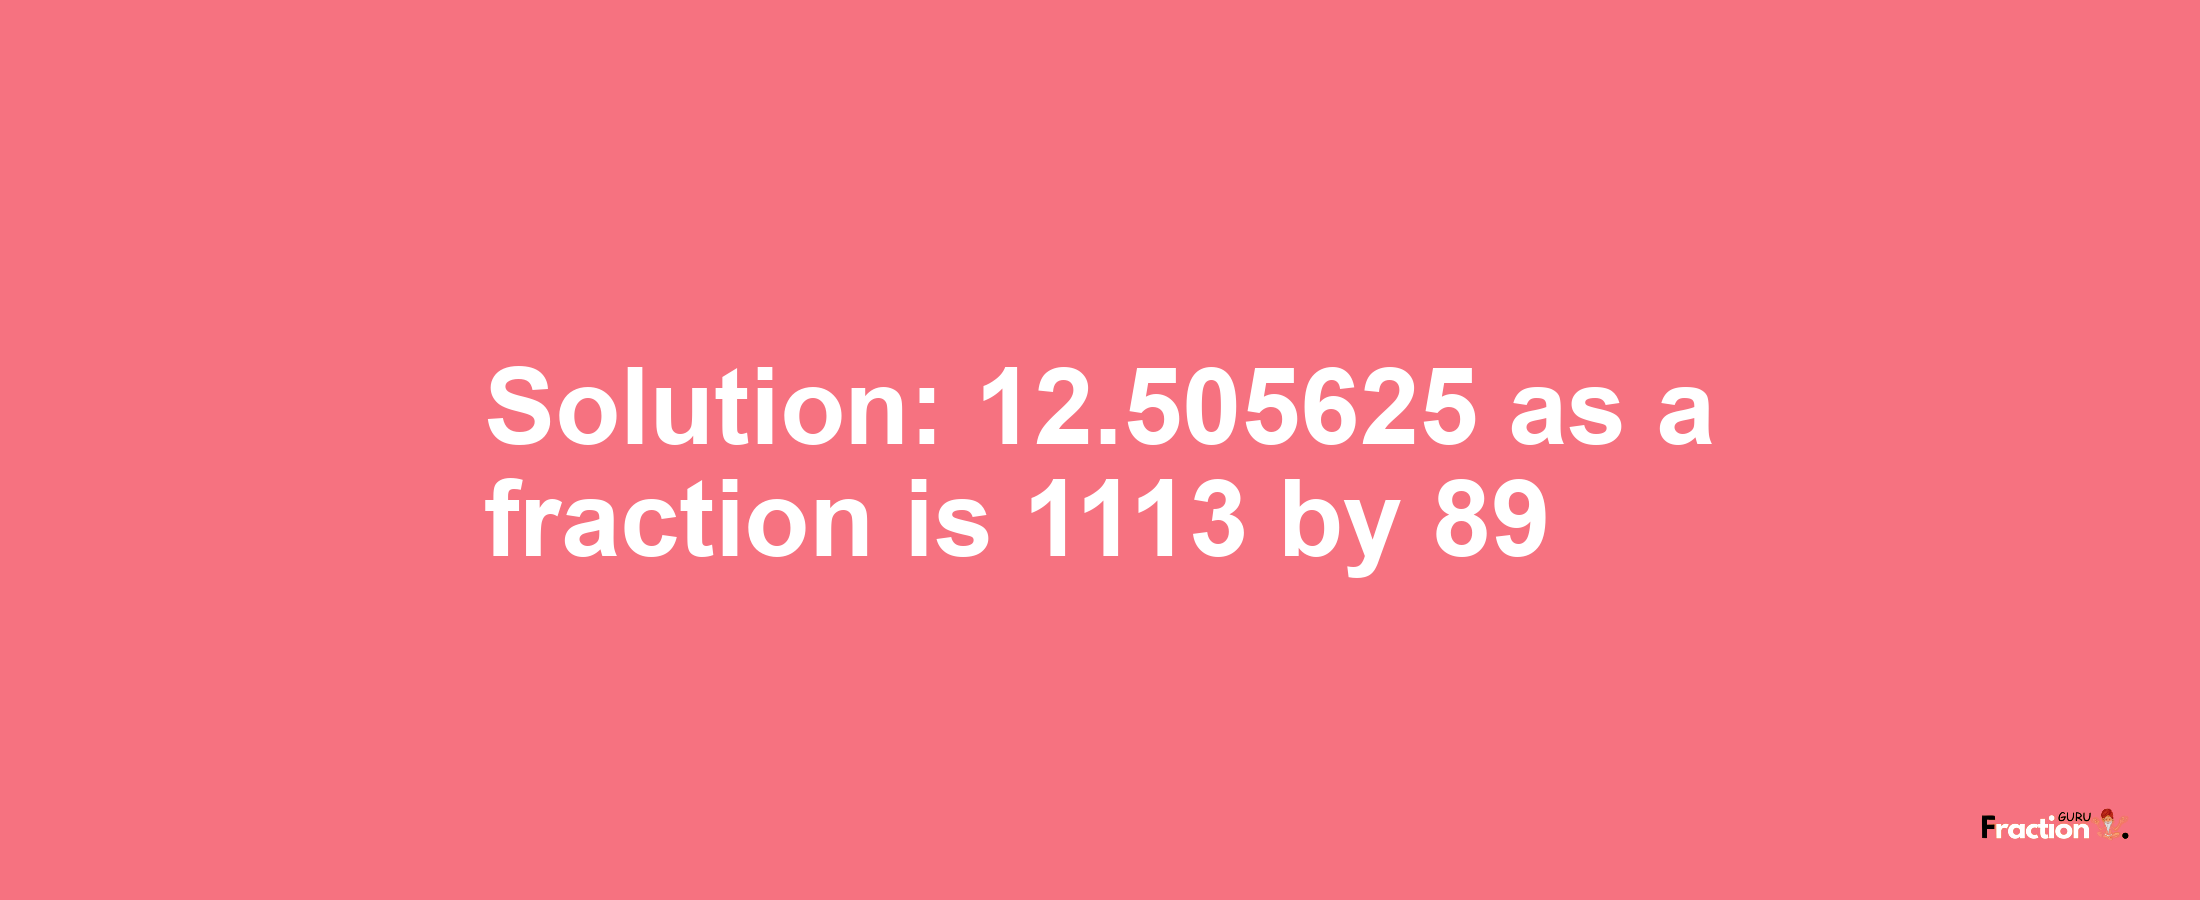 Solution:12.505625 as a fraction is 1113/89